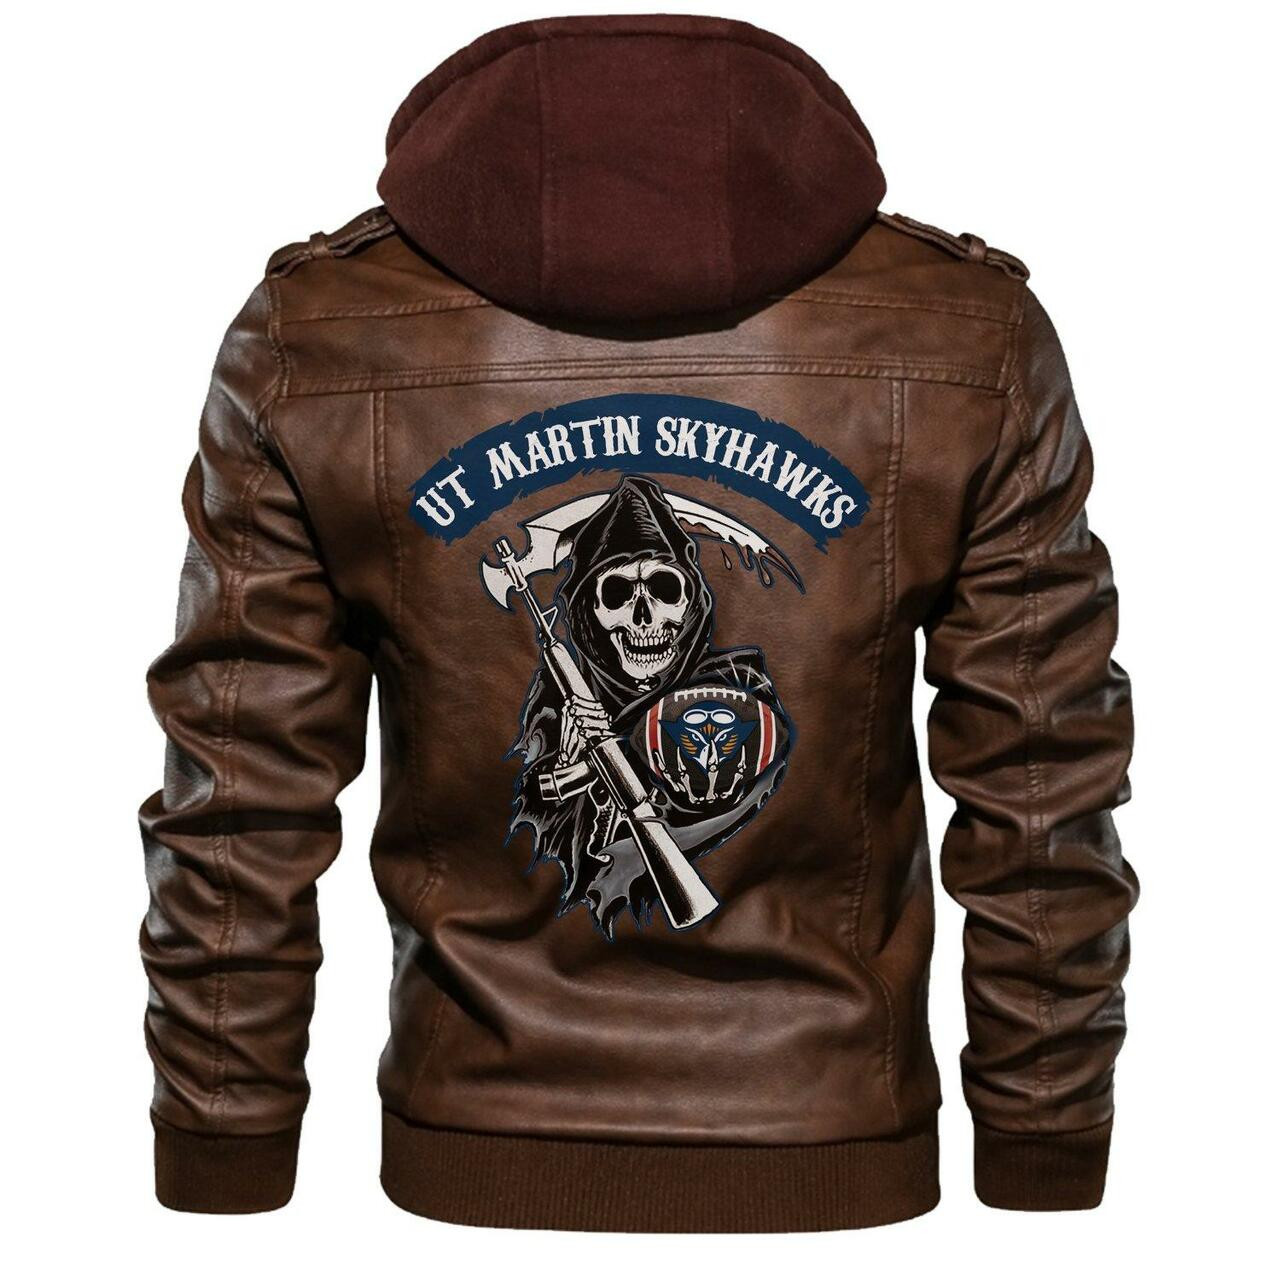 Don't wait another minute, Get Hot Leather Jacket today 57